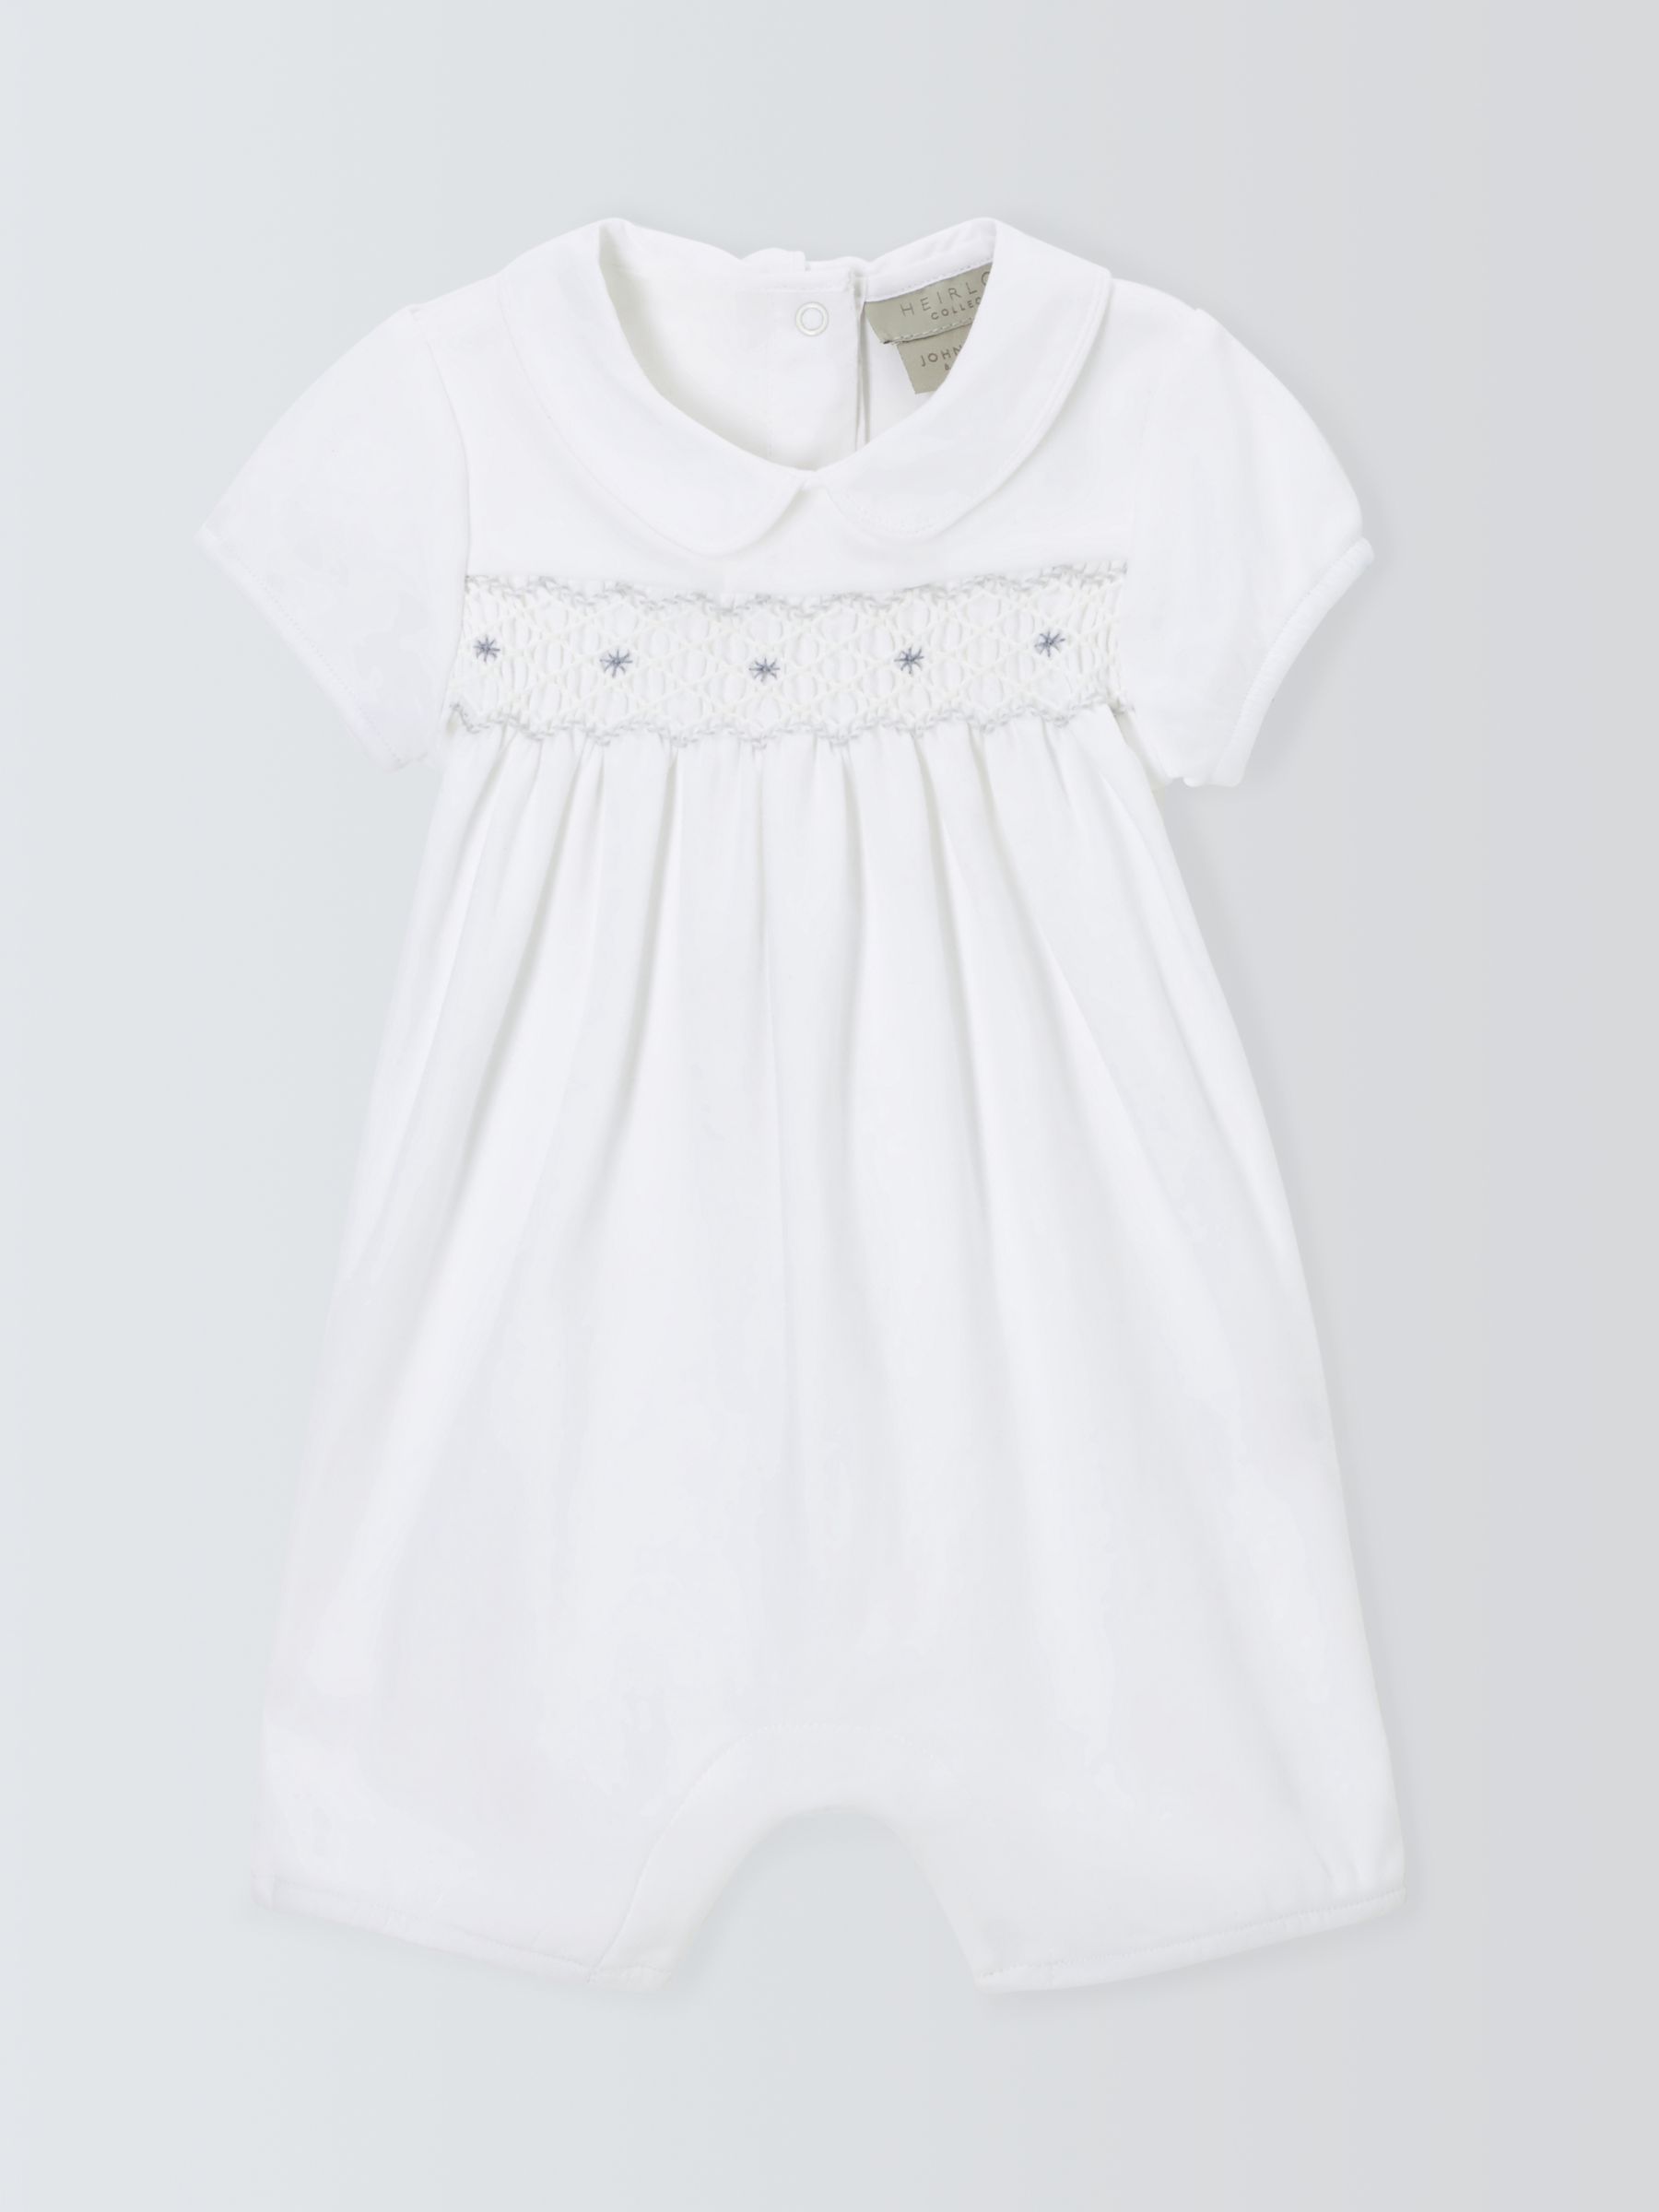 John Lewis Heirloom Collection Baby Pima Cotton Smocked Romper, White, 0-3 months